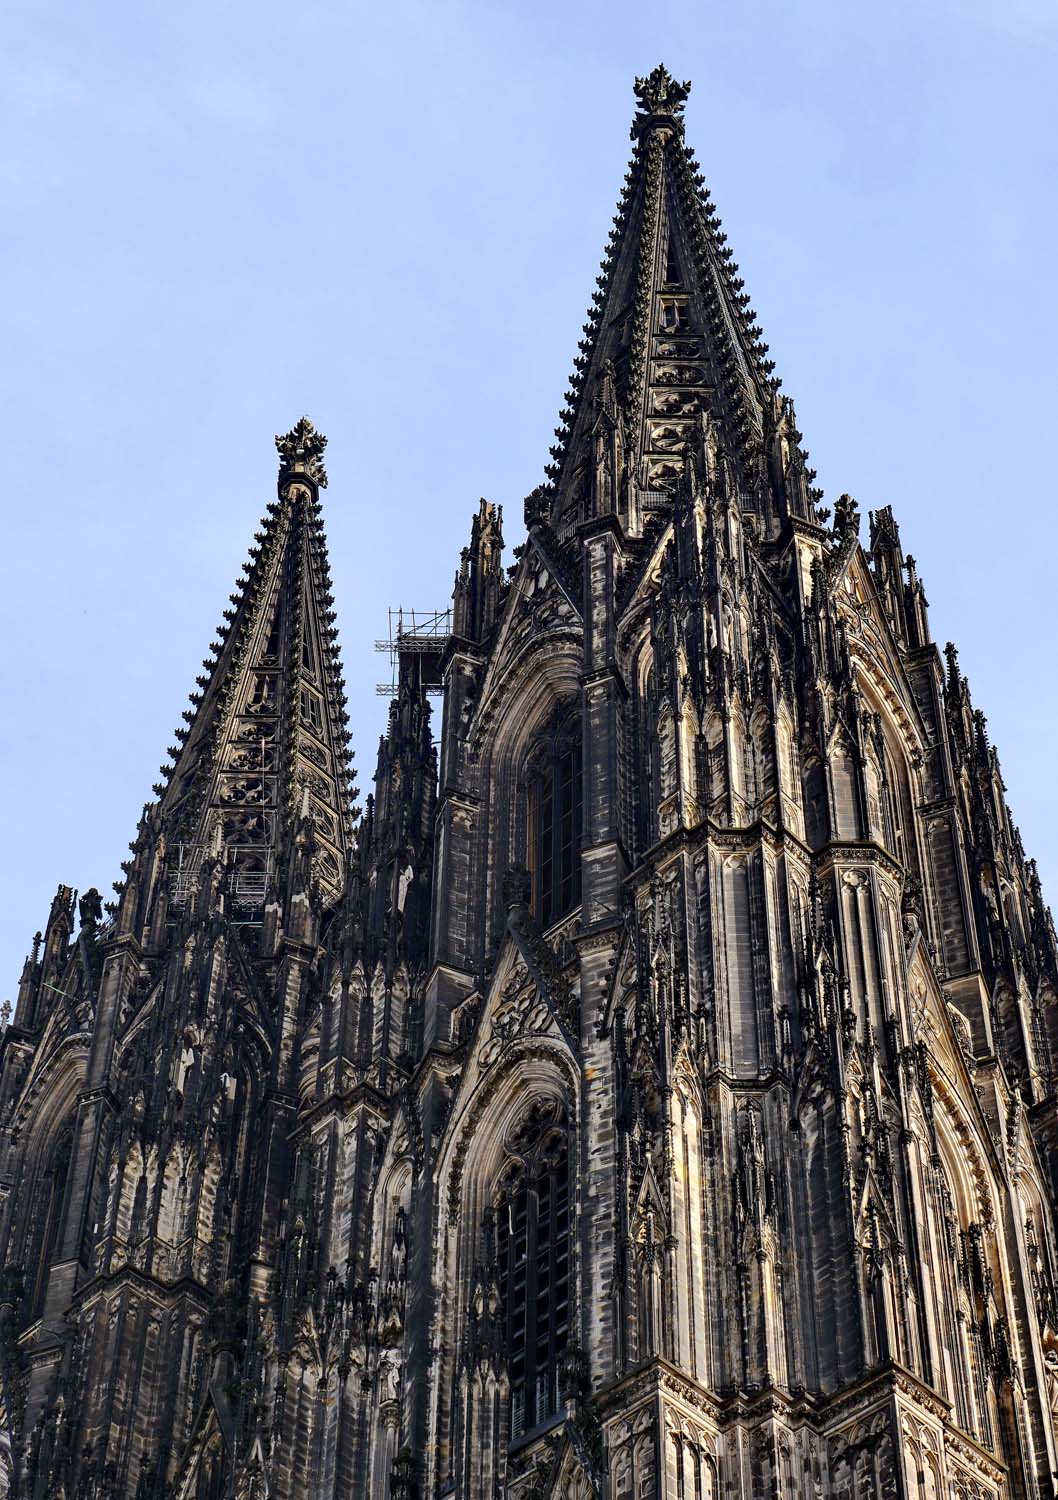 The Cologne cathedral.